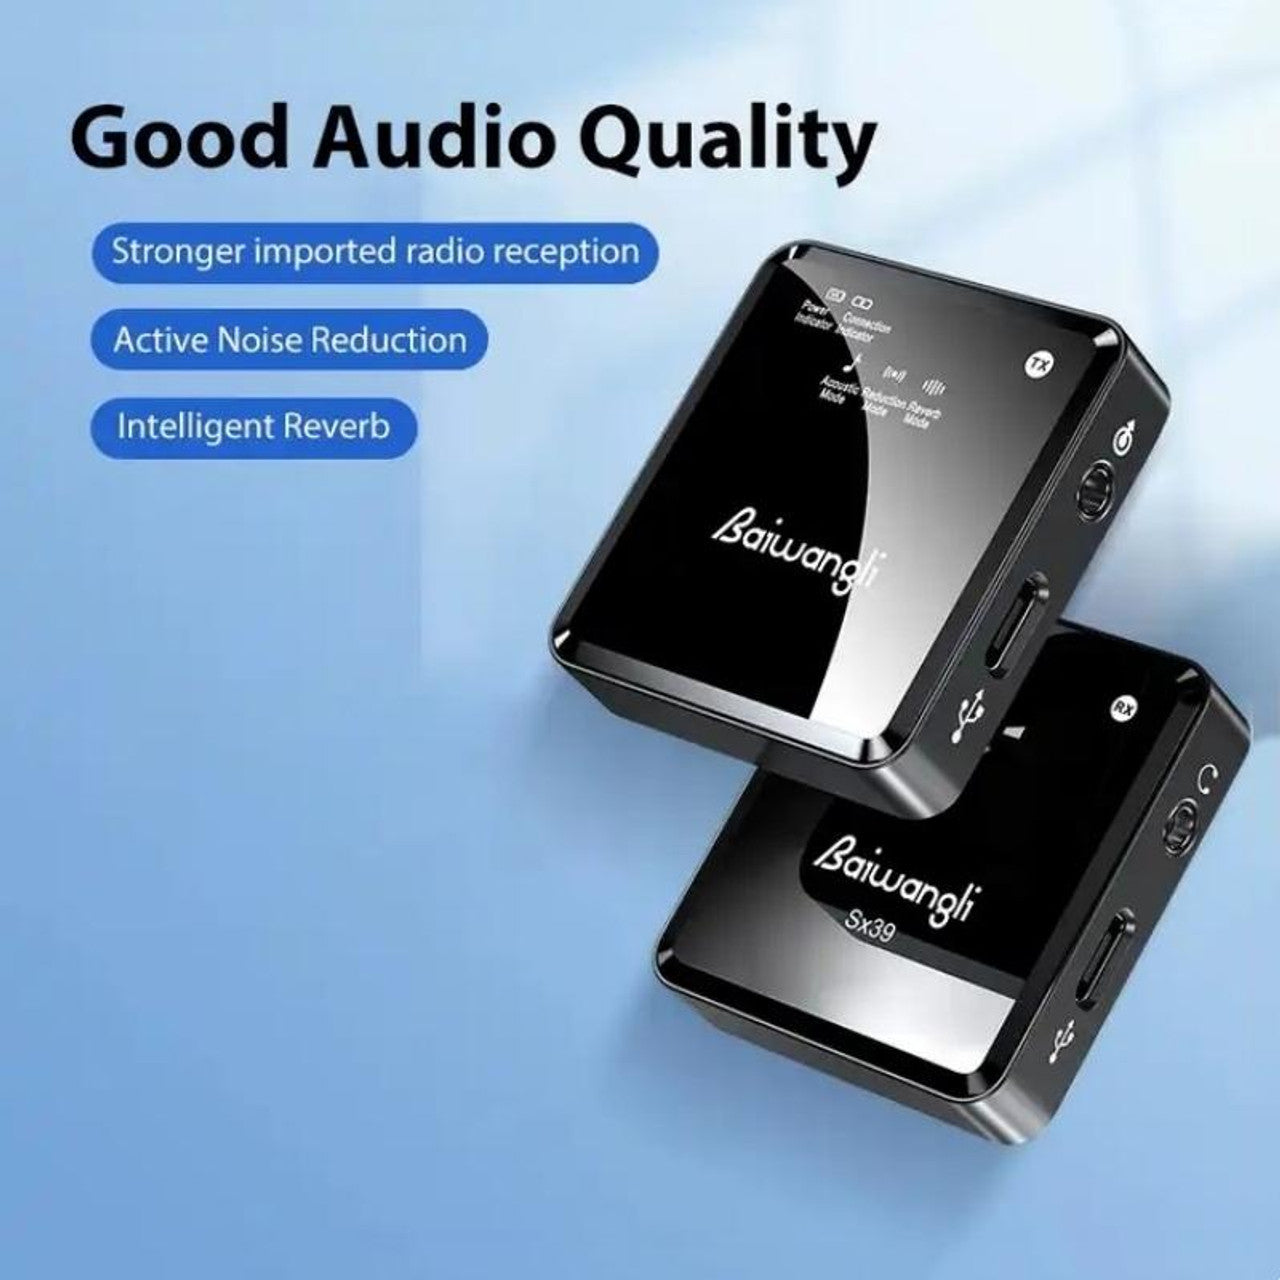 ALOGY SX39 Single Wireless Microphone TypeC 1 Controller 1 Microphone Collar Mic Intelligent Noise Cancellation